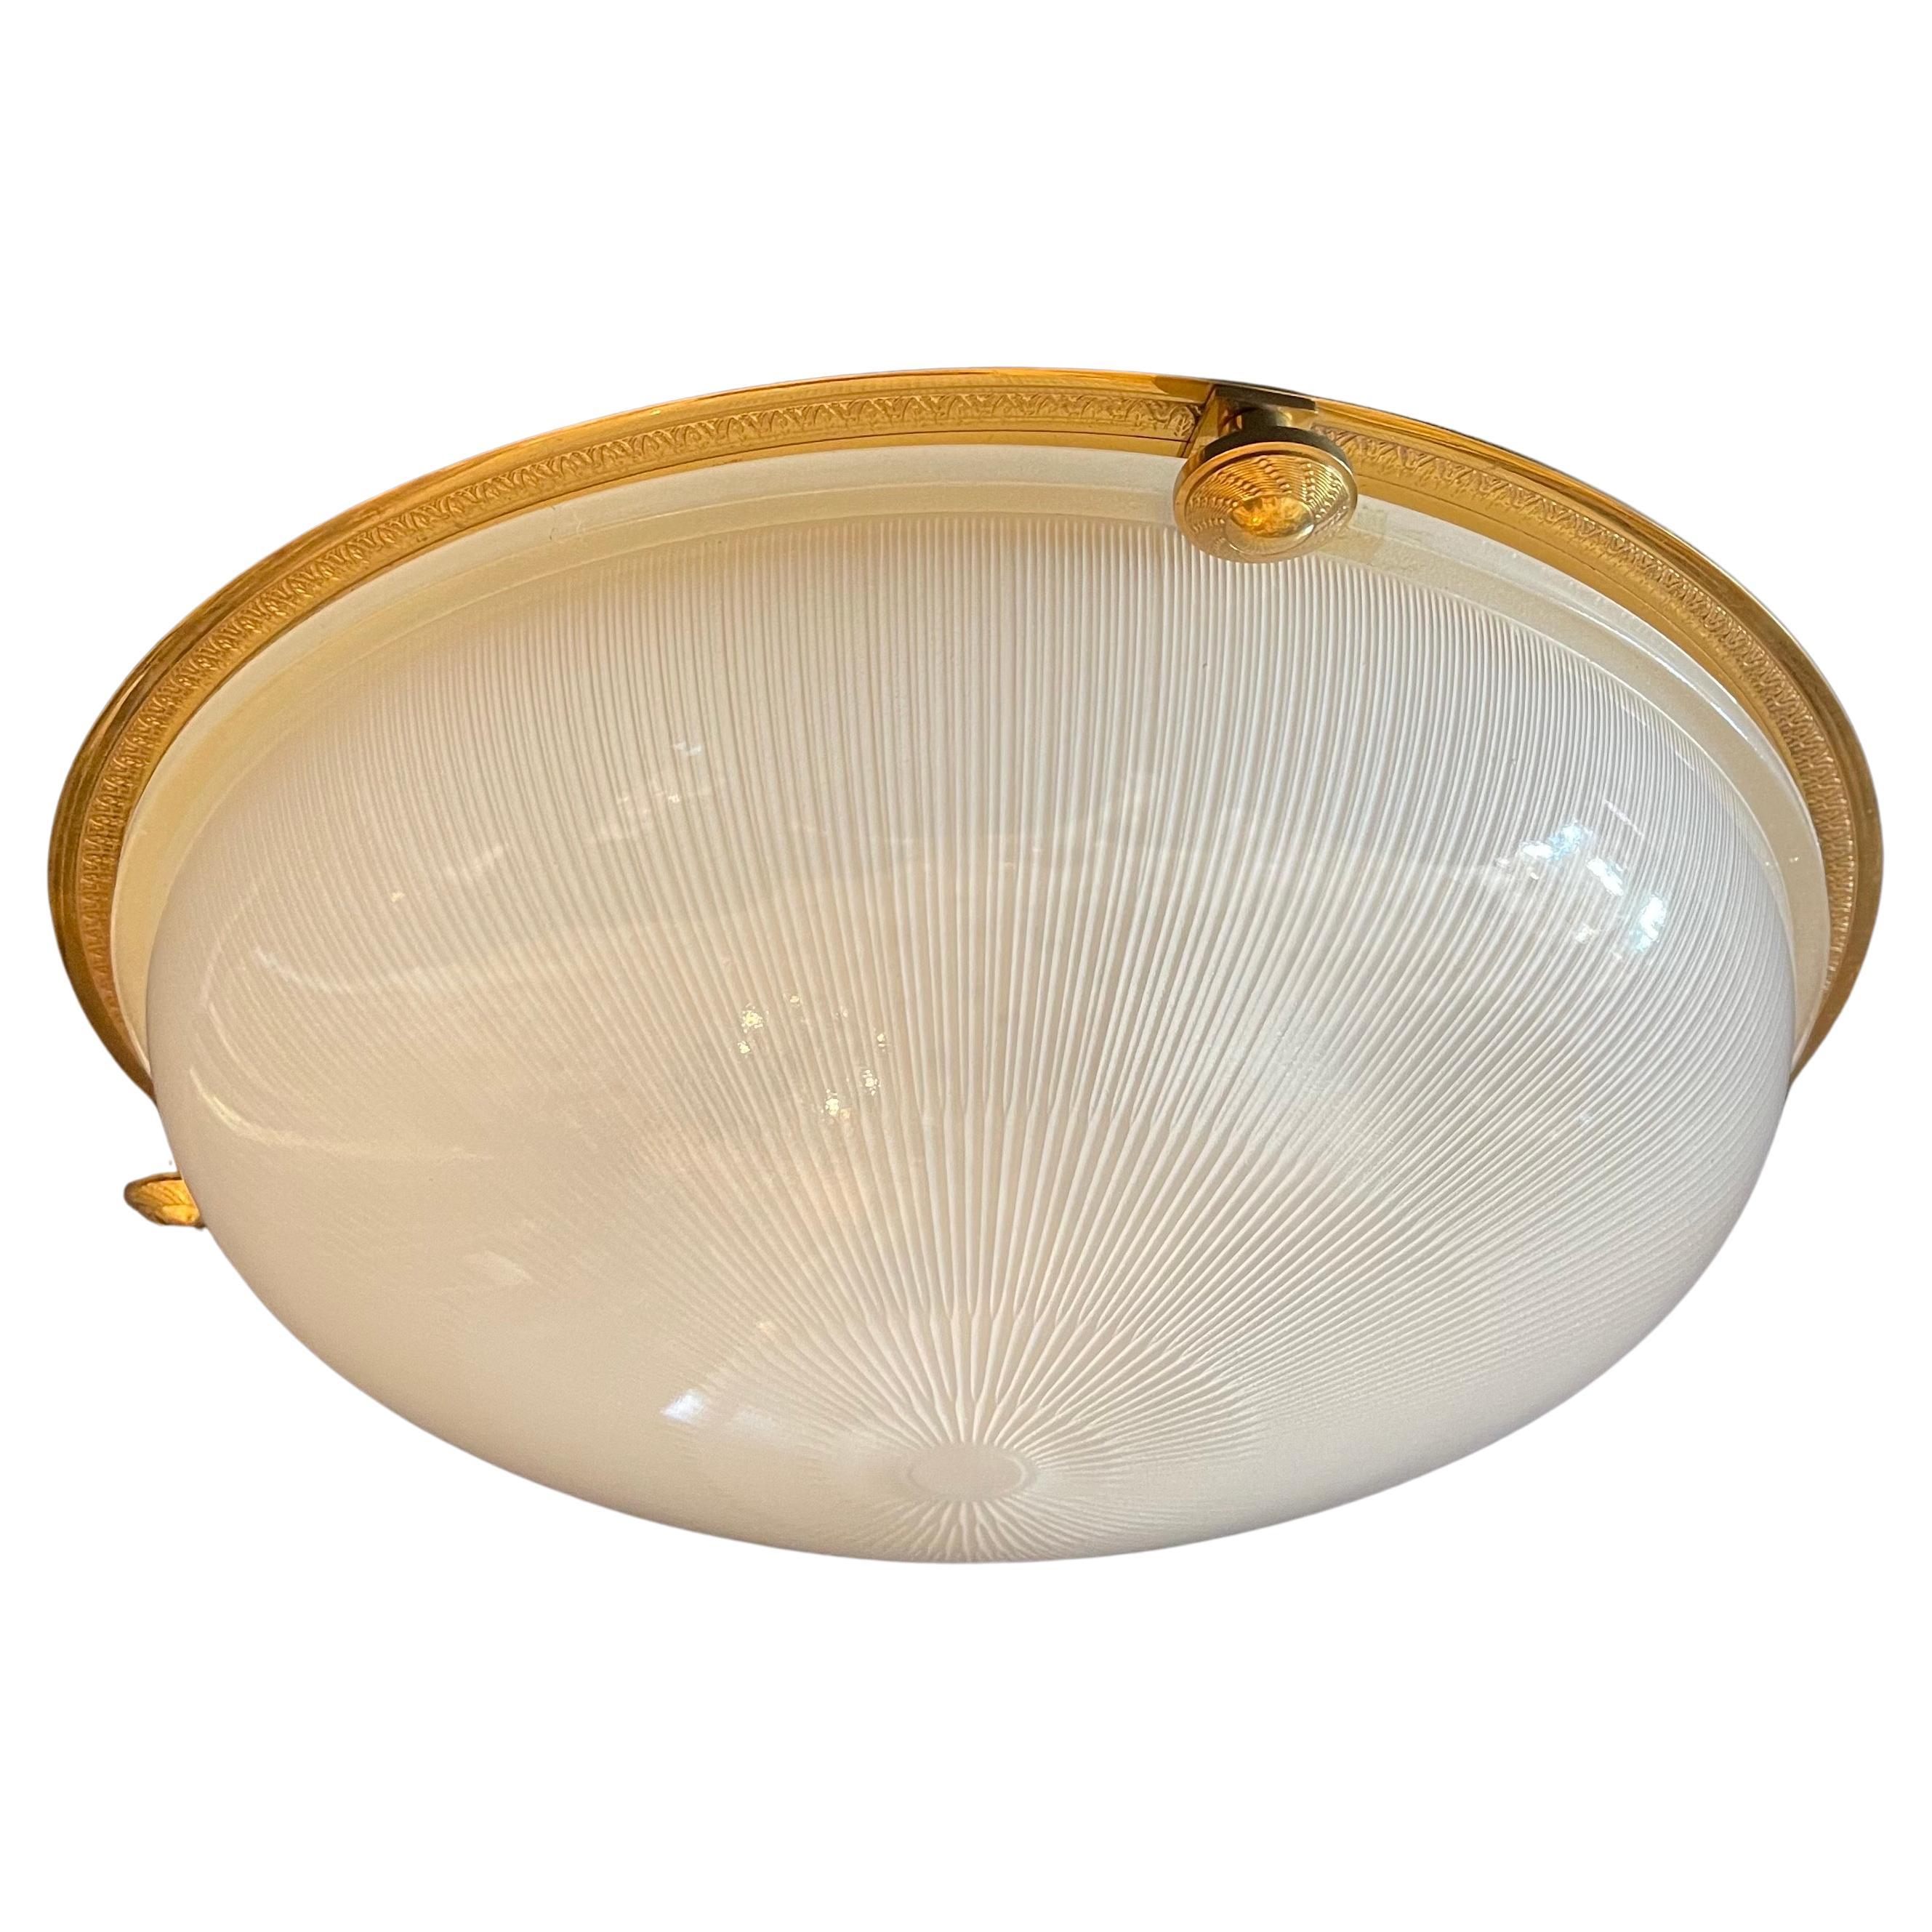 A Wonderful Large Vaughan Regency Style Bronze / Brass Flush Mount Ceiling Light Mounted With A Cut Sunburst Detail To Matte Finish Glass Bowl.This Stunning Fixture Has 3 Candelabra Bulbs. 
